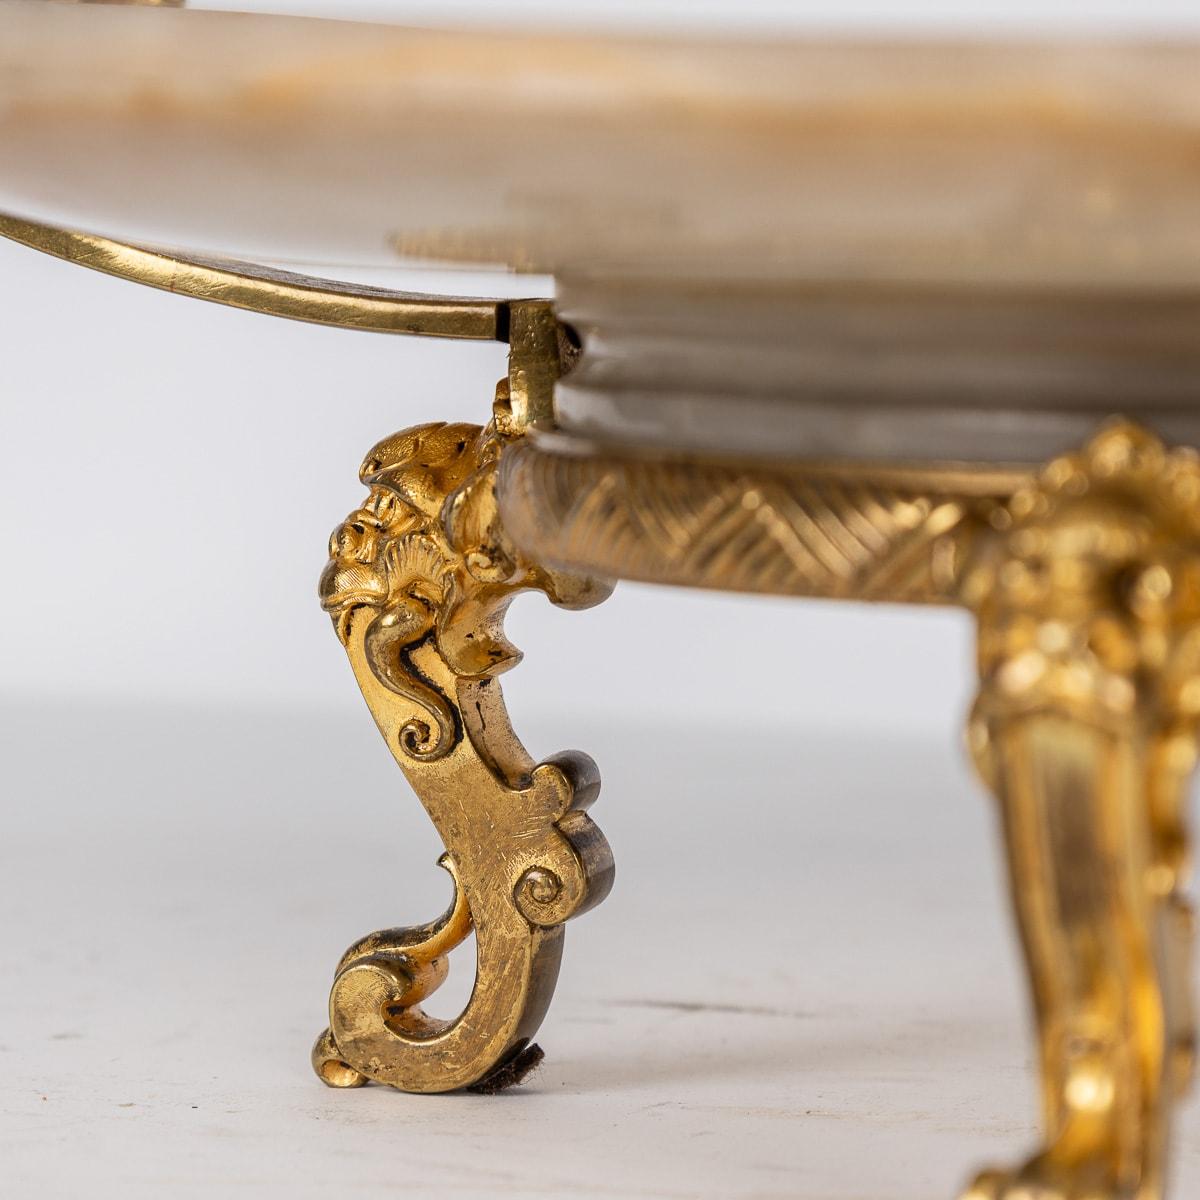 19th Century French Ormolu Mounted Onyx Marble & Enamel Centrepiece c.1880 For Sale 14